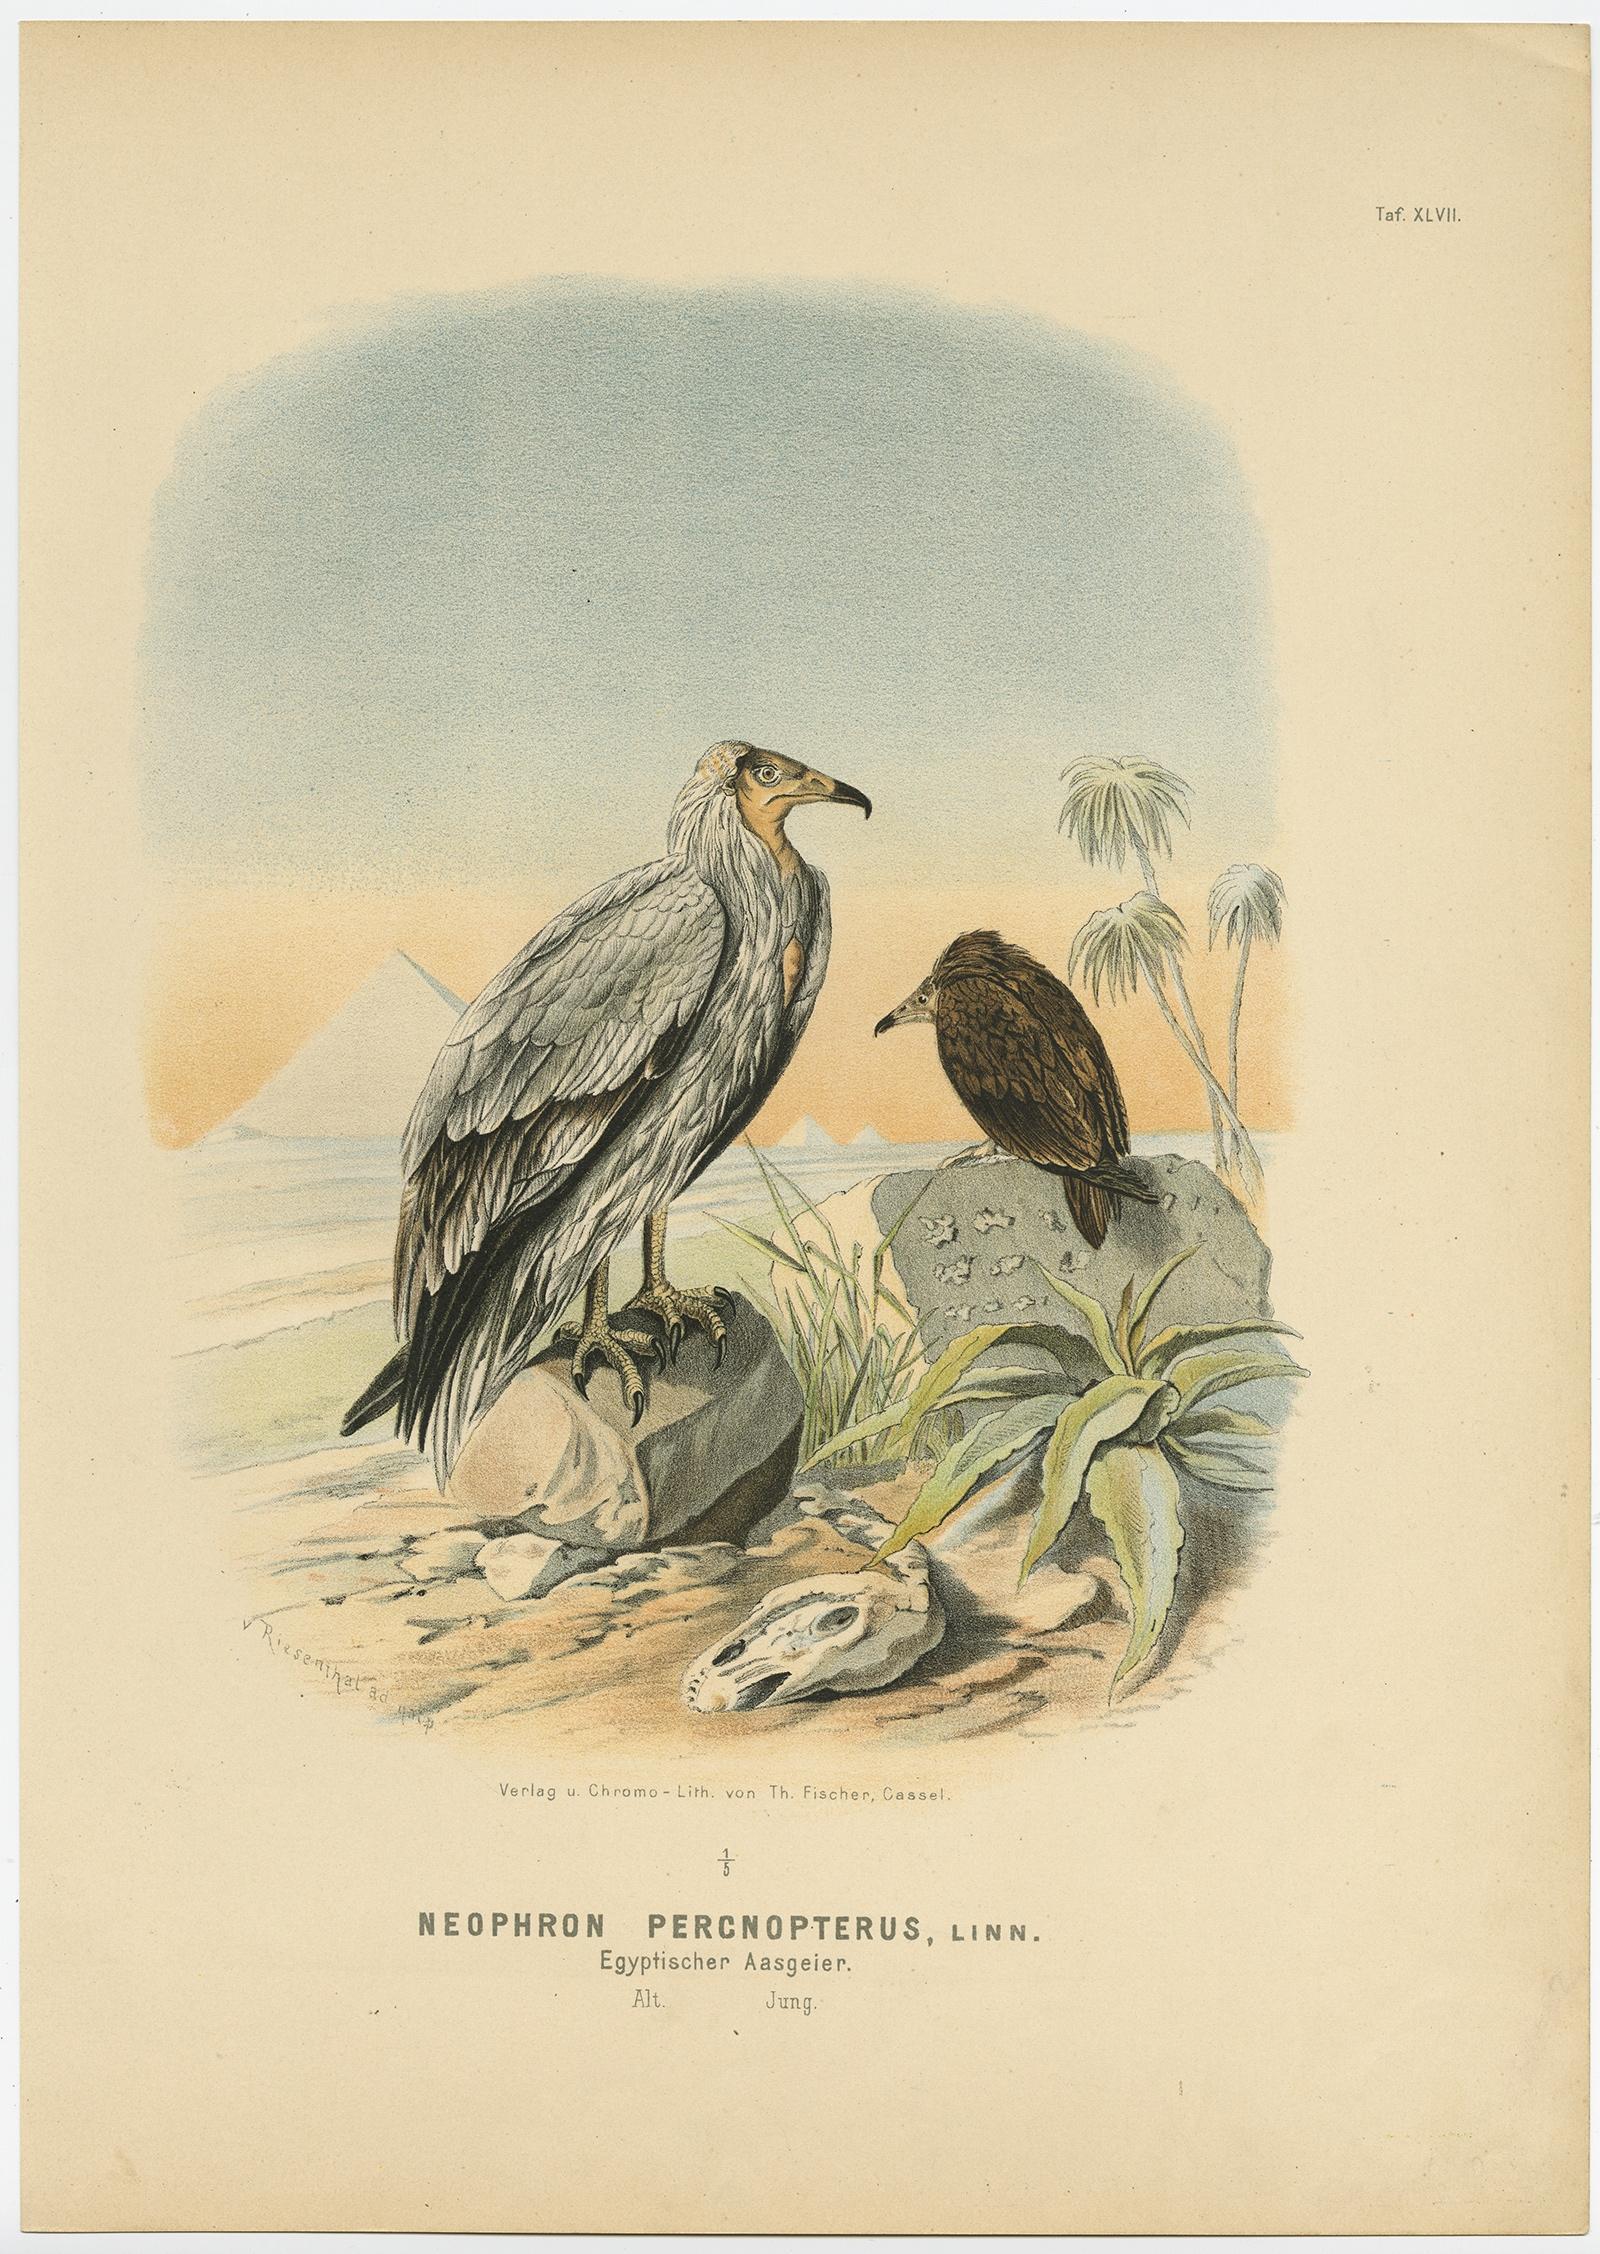 Antique print, titled: 'Taf. XLVII. Neophron Percnopterus, Egyptischer Aasgeier. Alt - Jung.' 

This plate shows the Egyptian vulture (Neophron percnopterus), also called the white scavenger vulture or pharaoh's chicken, adult and young.

This